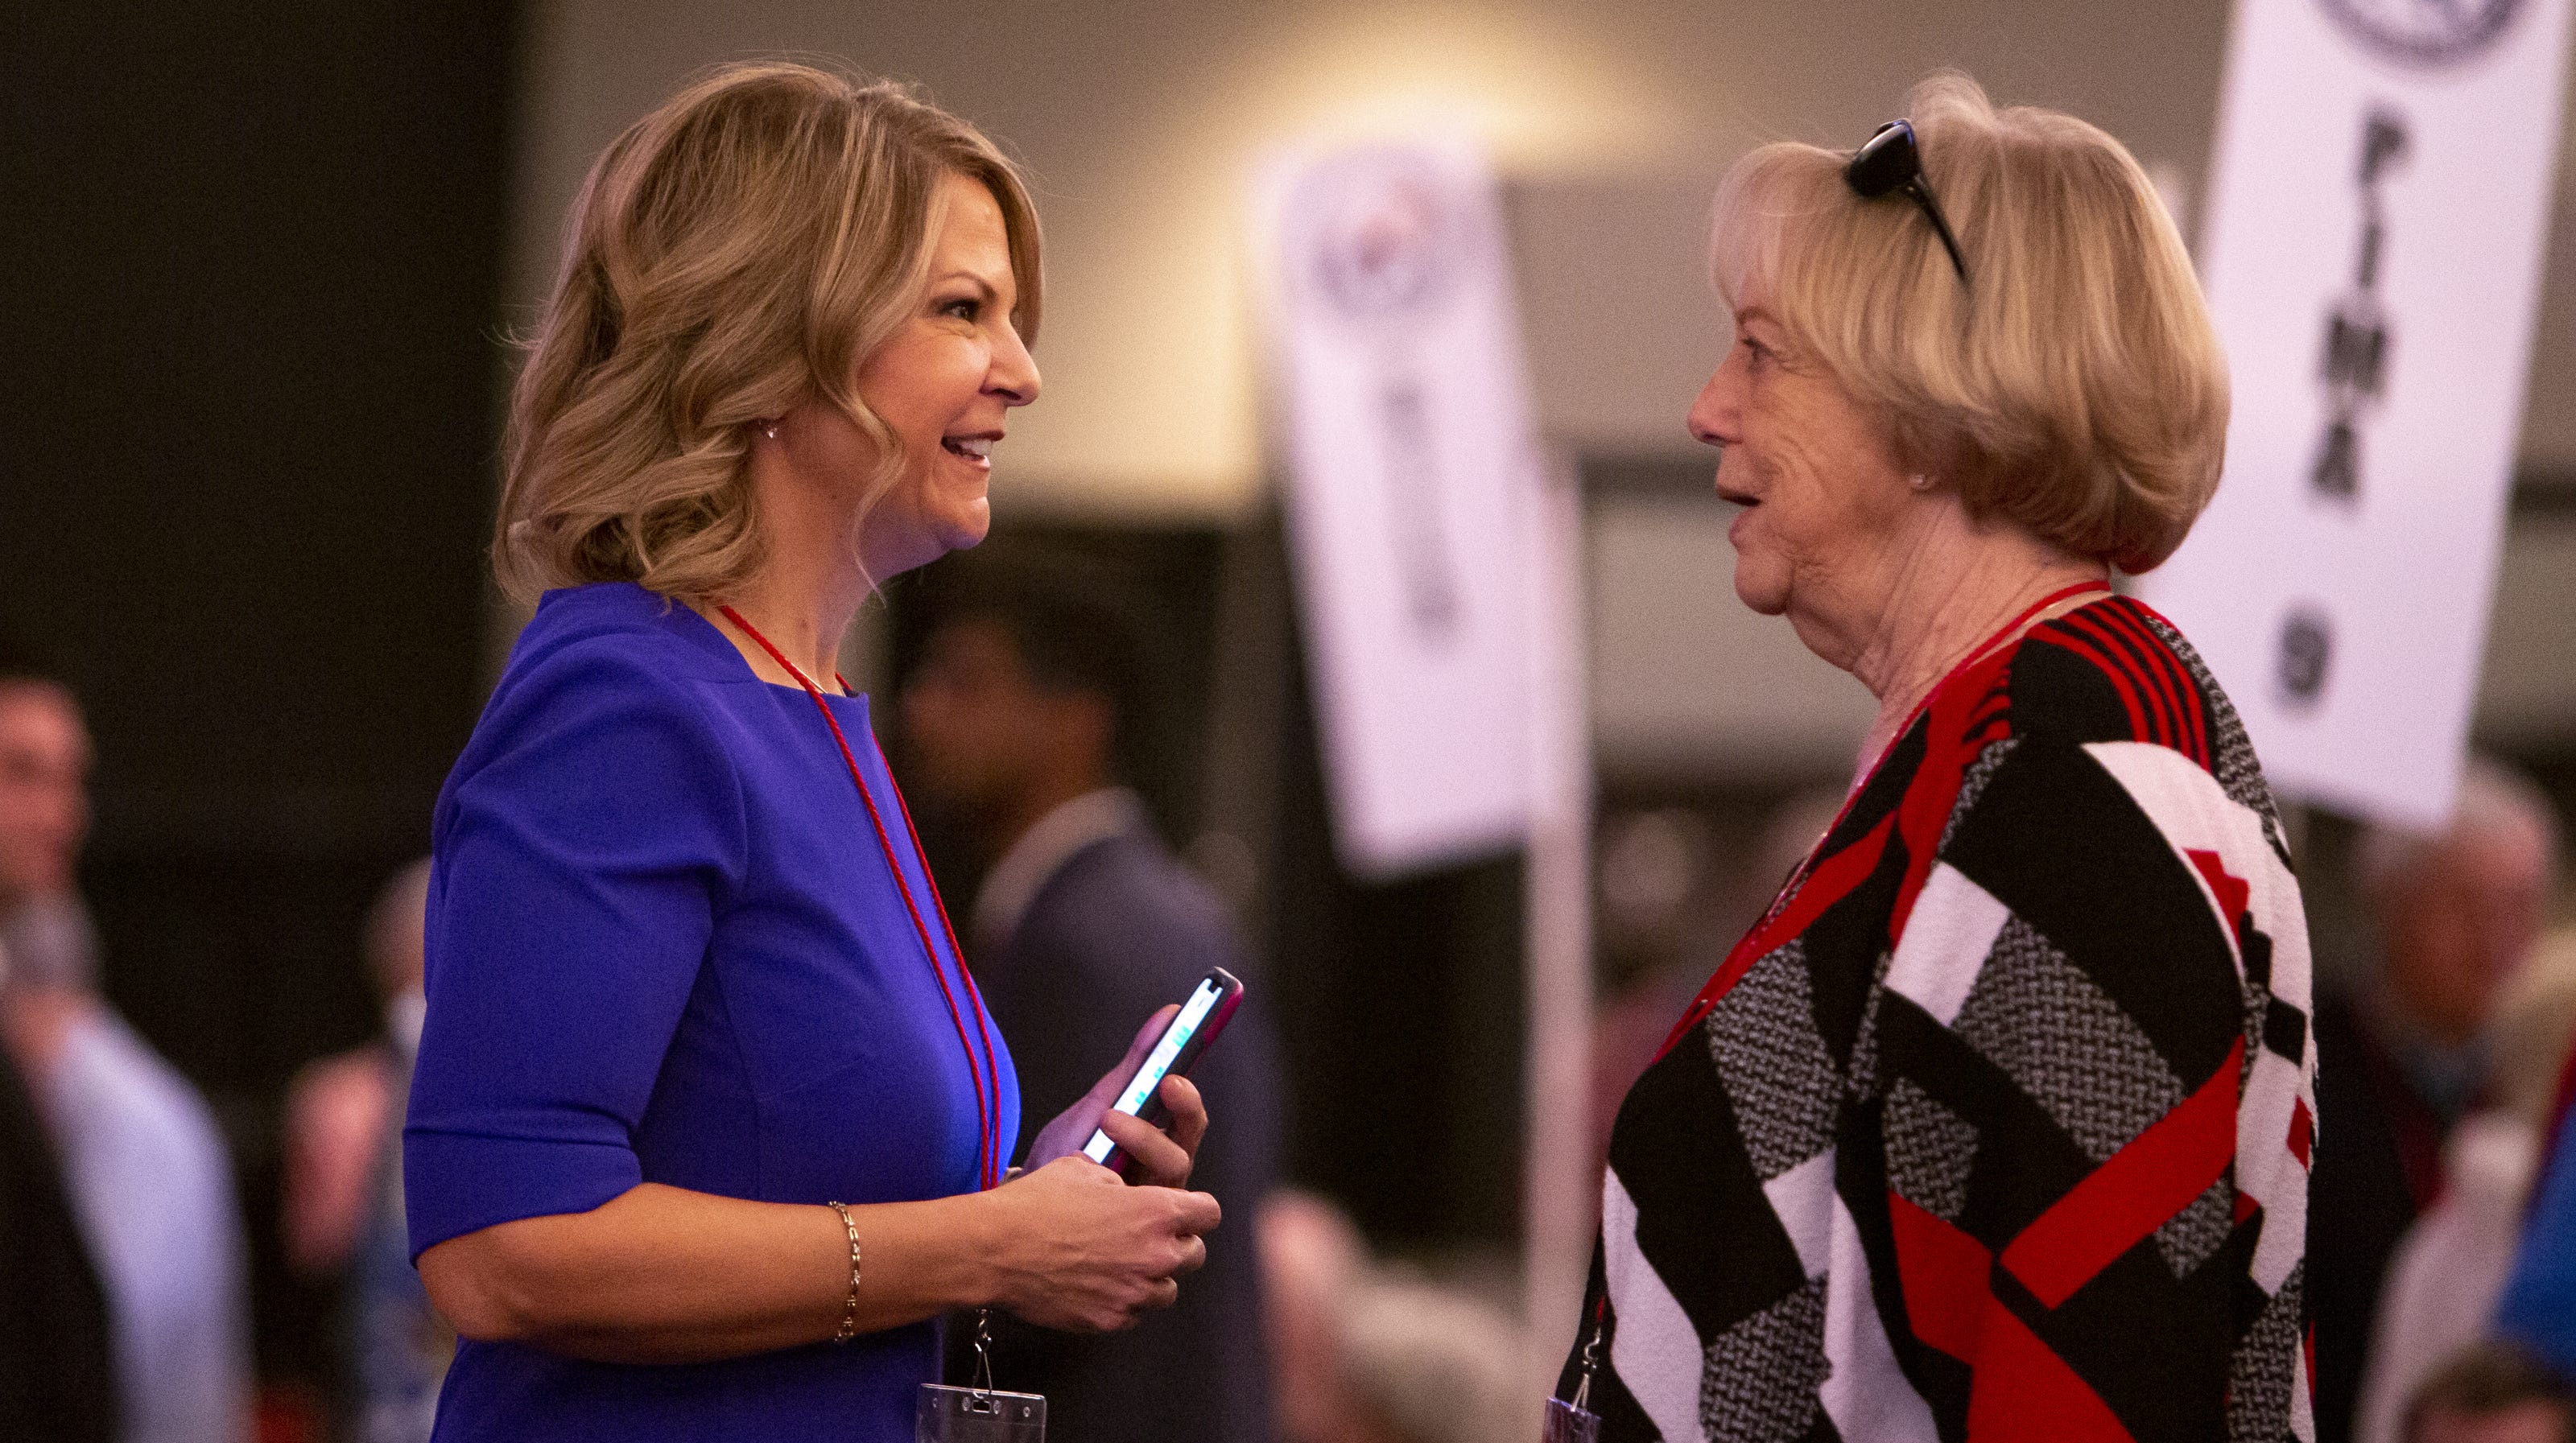 Conservative Kelli Ward to lead Arizona Republican Party after upset